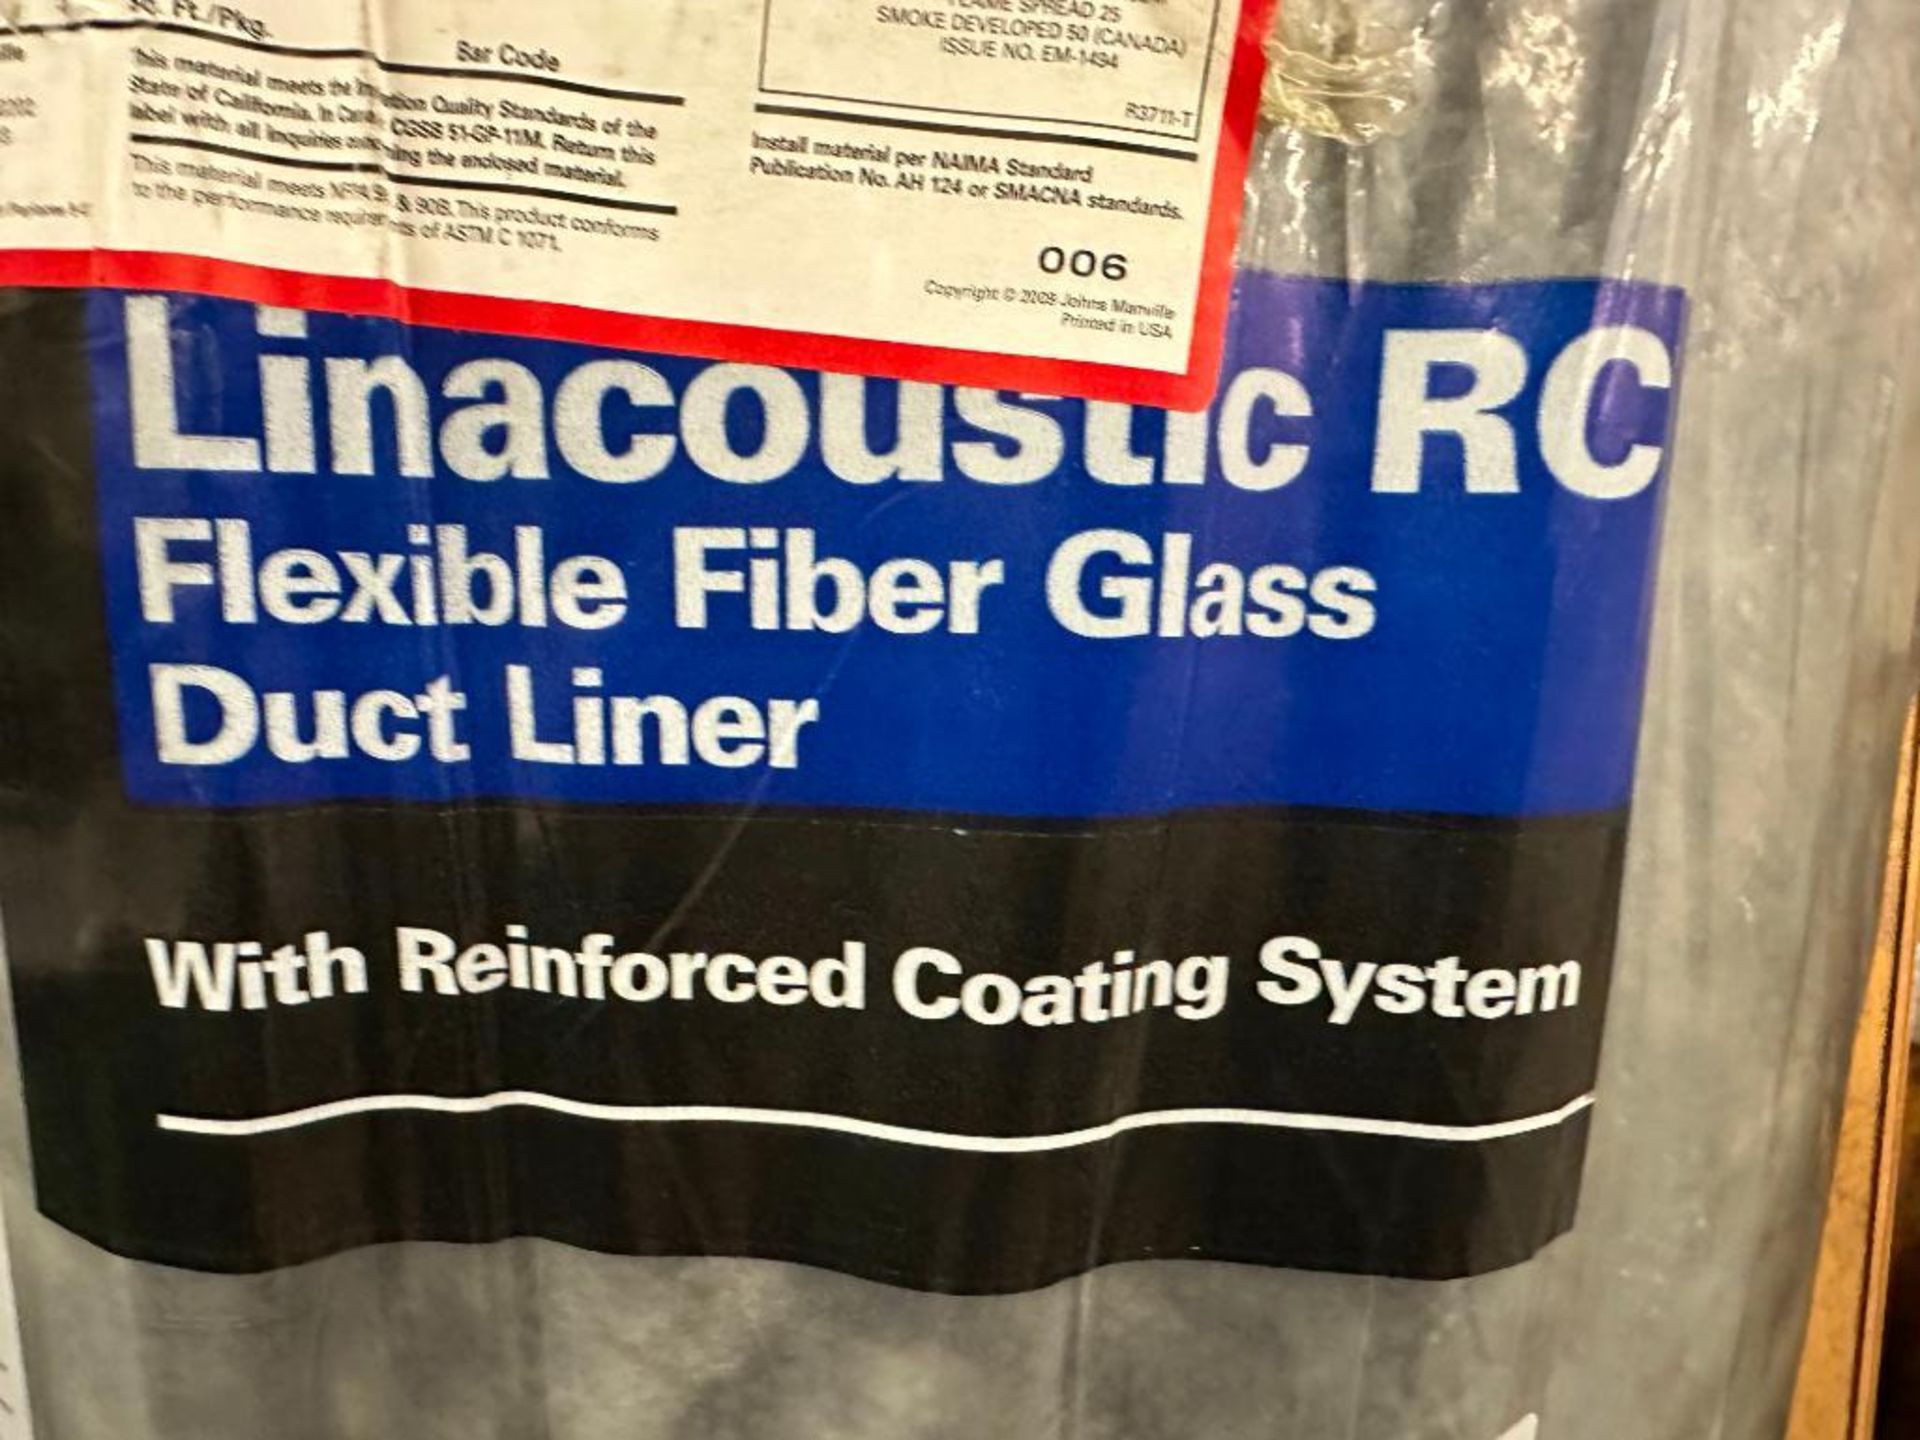 LINACOUSTIC RC FLEXIBLE FIBER GLASS DUCT LINER - Image 3 of 3